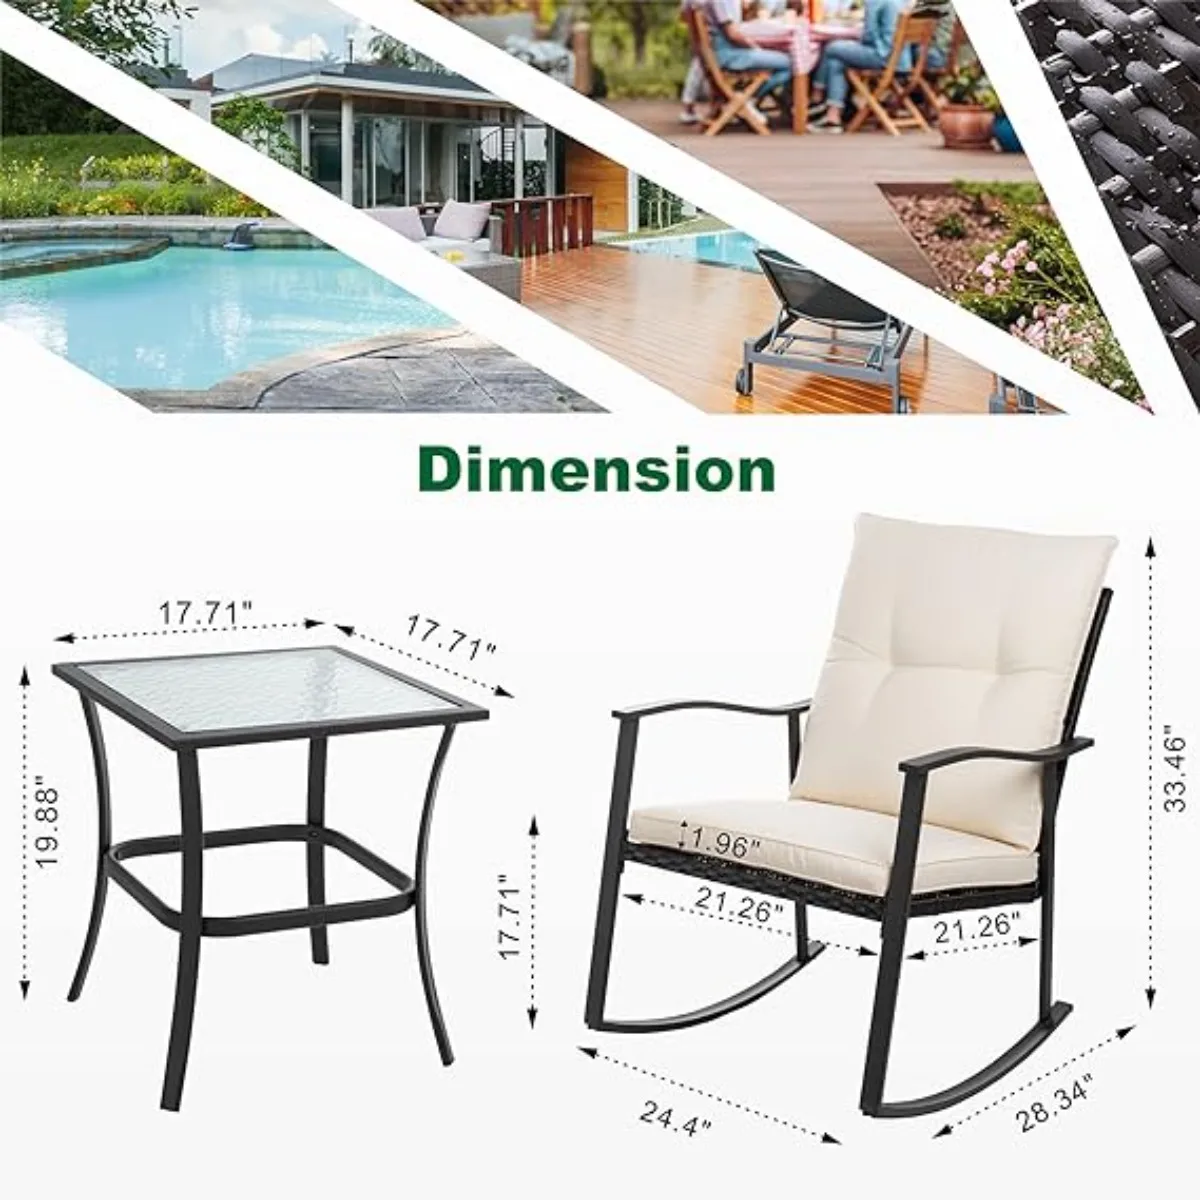 Shintenchi 3 Piece Rocking Bistro Set, Outdoor Furniture with Rocker Chairs and Glass Coffee Table Set of 3,Beige Cushion 2